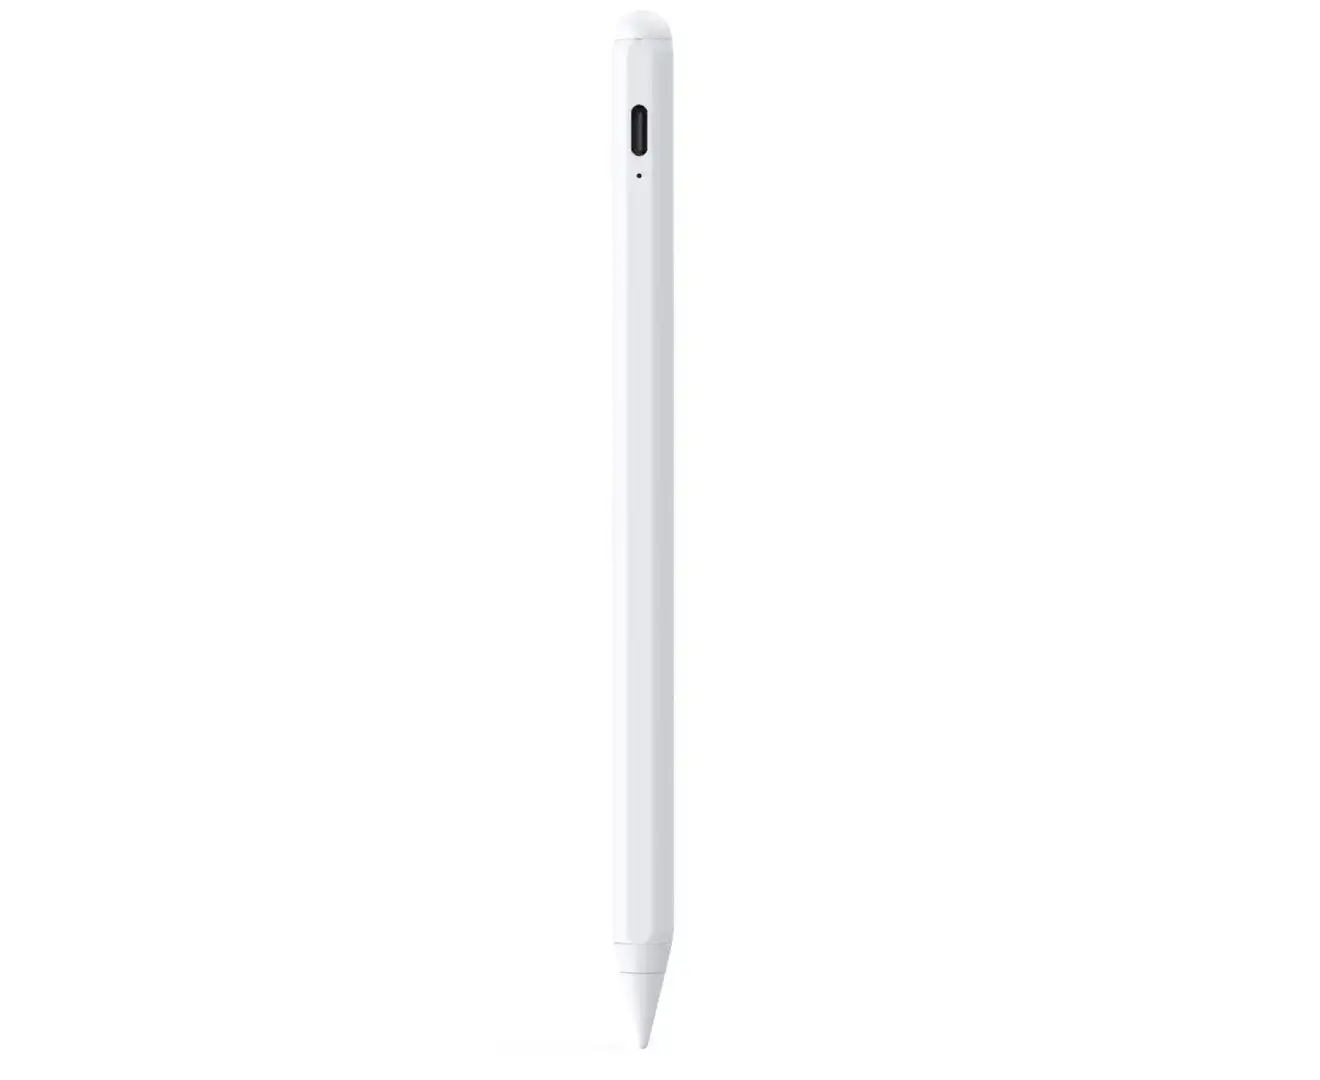 Orotec Magnetic Stylus Pen with Tilt Sensitivity for Apple iPad 2018 Model and Later, White